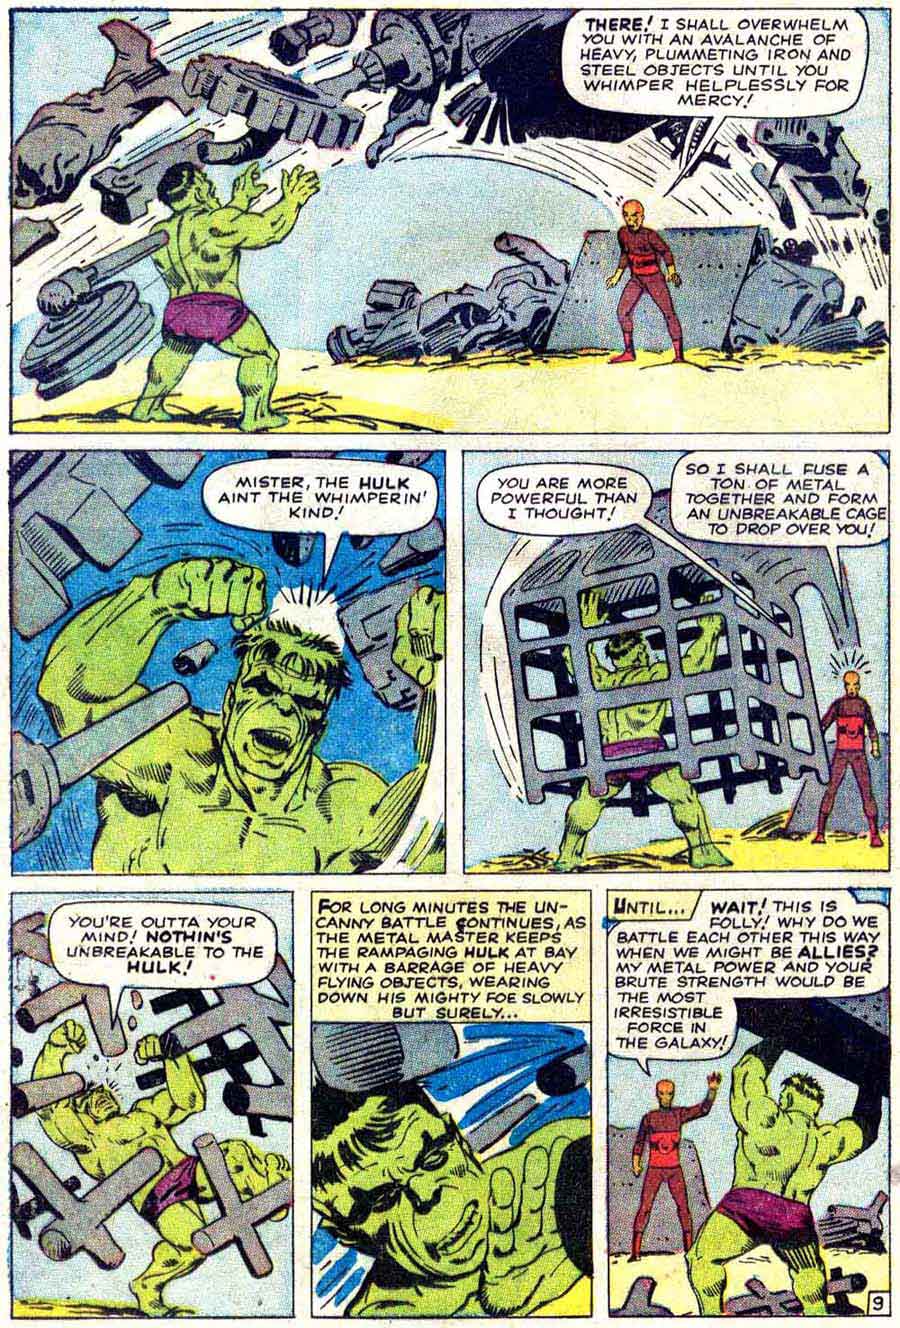 Incredible Hulk v1 #6 marvel silver age 1960s comic book page art by Steve Ditko